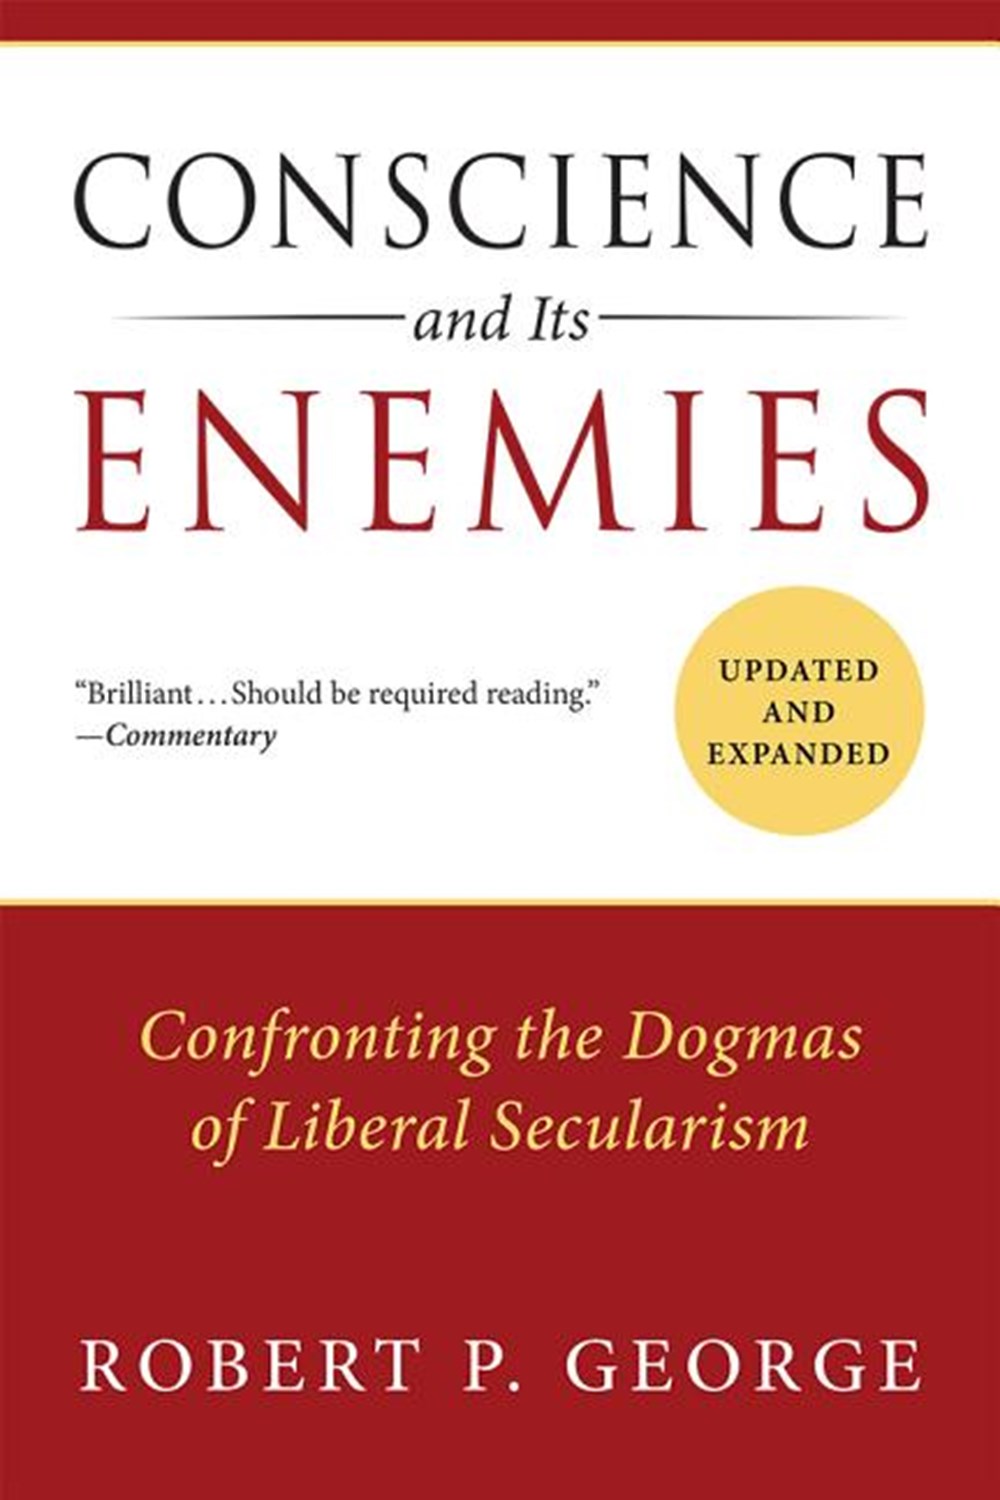 Conscience and Its Enemies: Confronting the Dogmas of Liberal Secularism